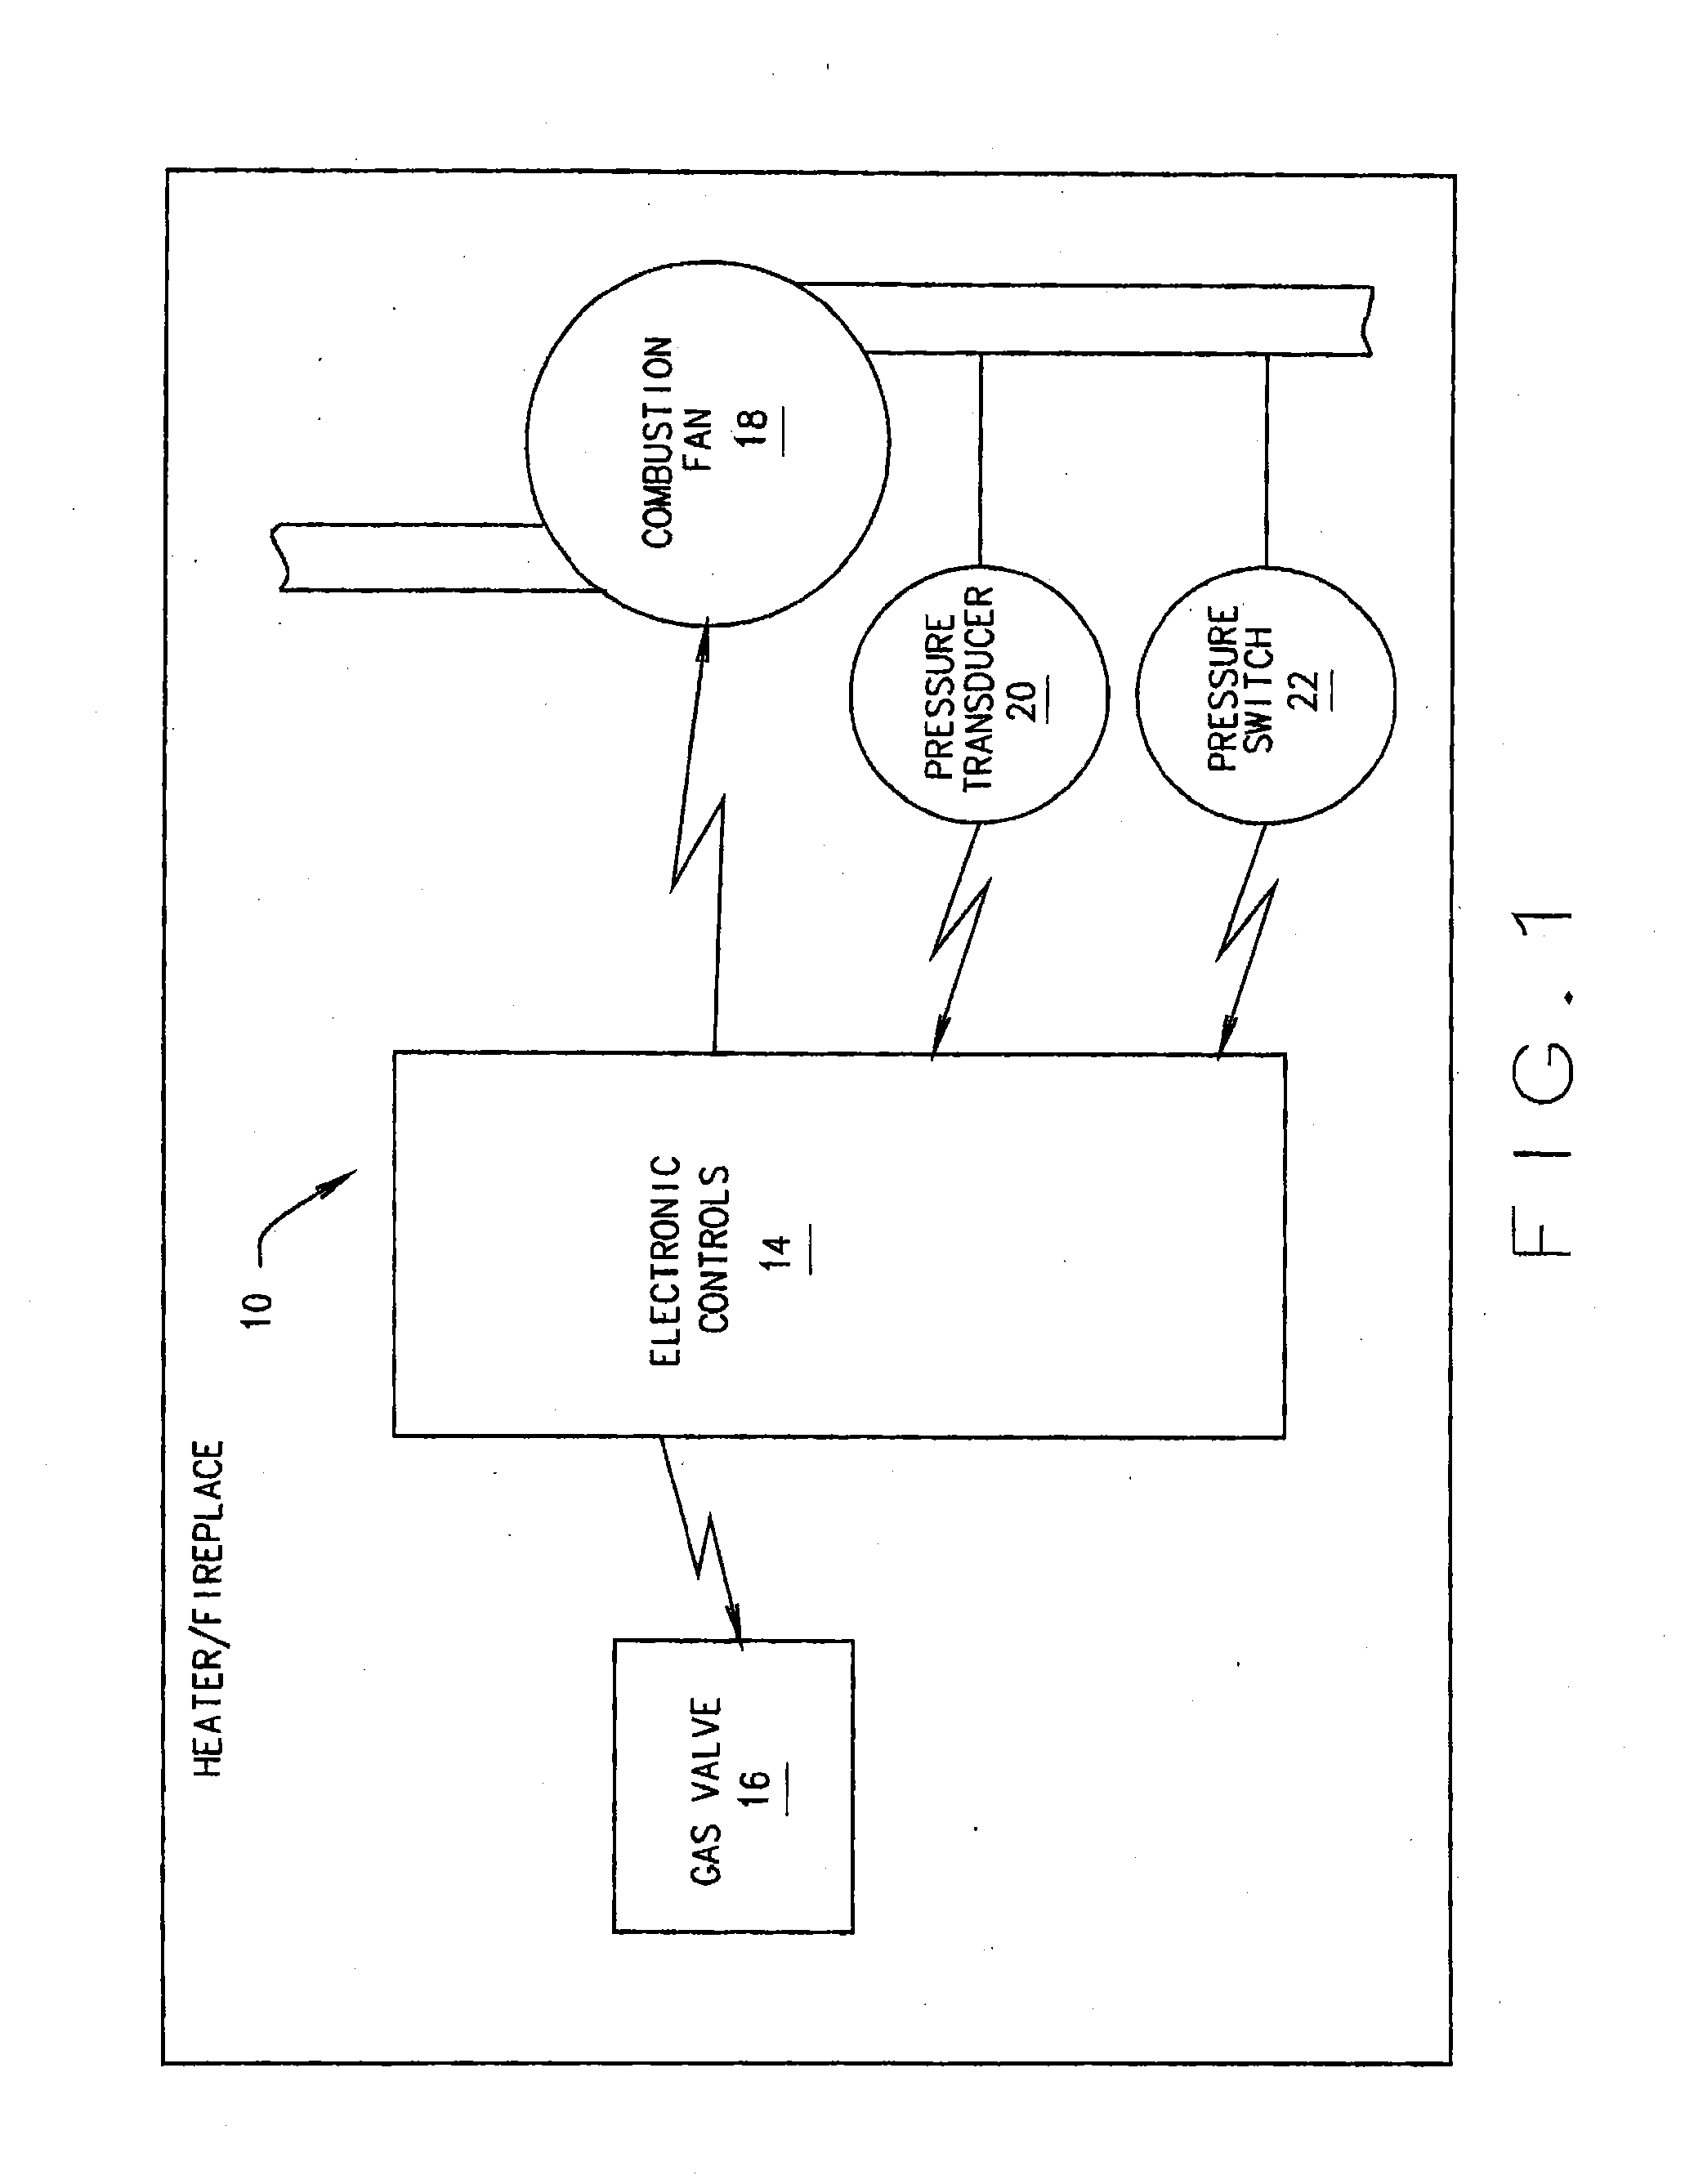 Control system for space heater/hearth